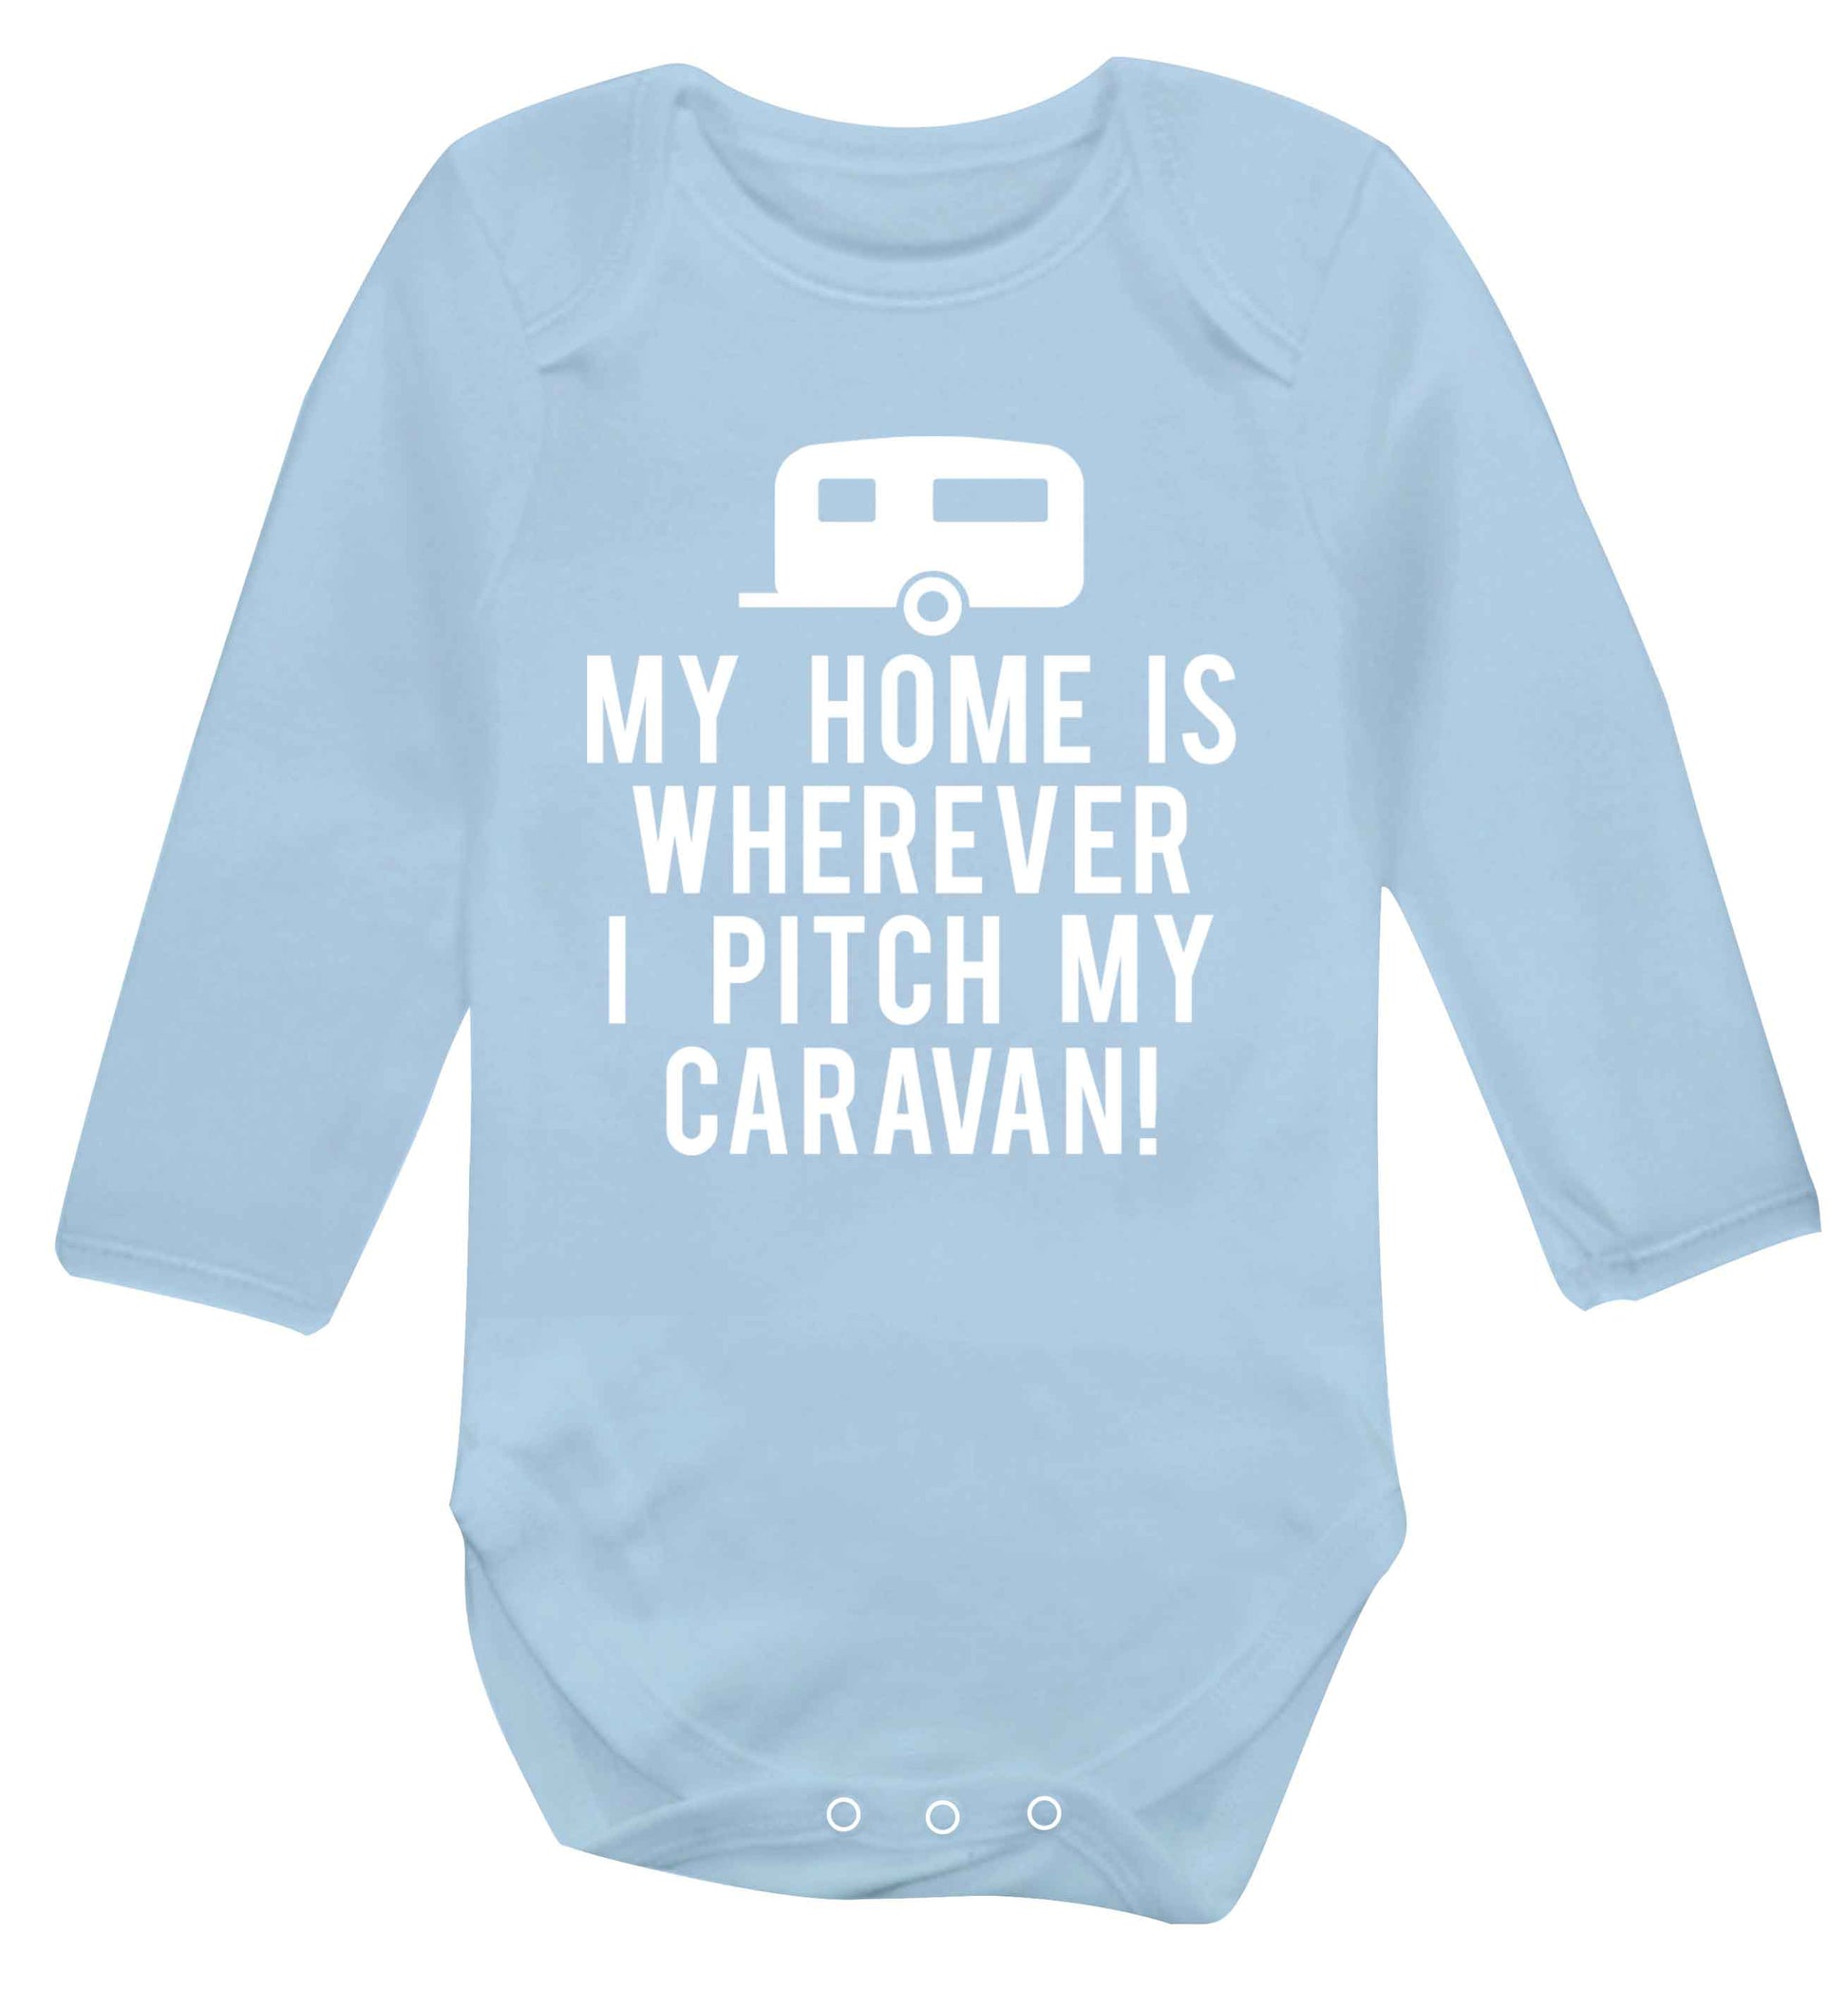 My home is wherever I pitch my caravan Baby Vest long sleeved pale blue 6-12 months